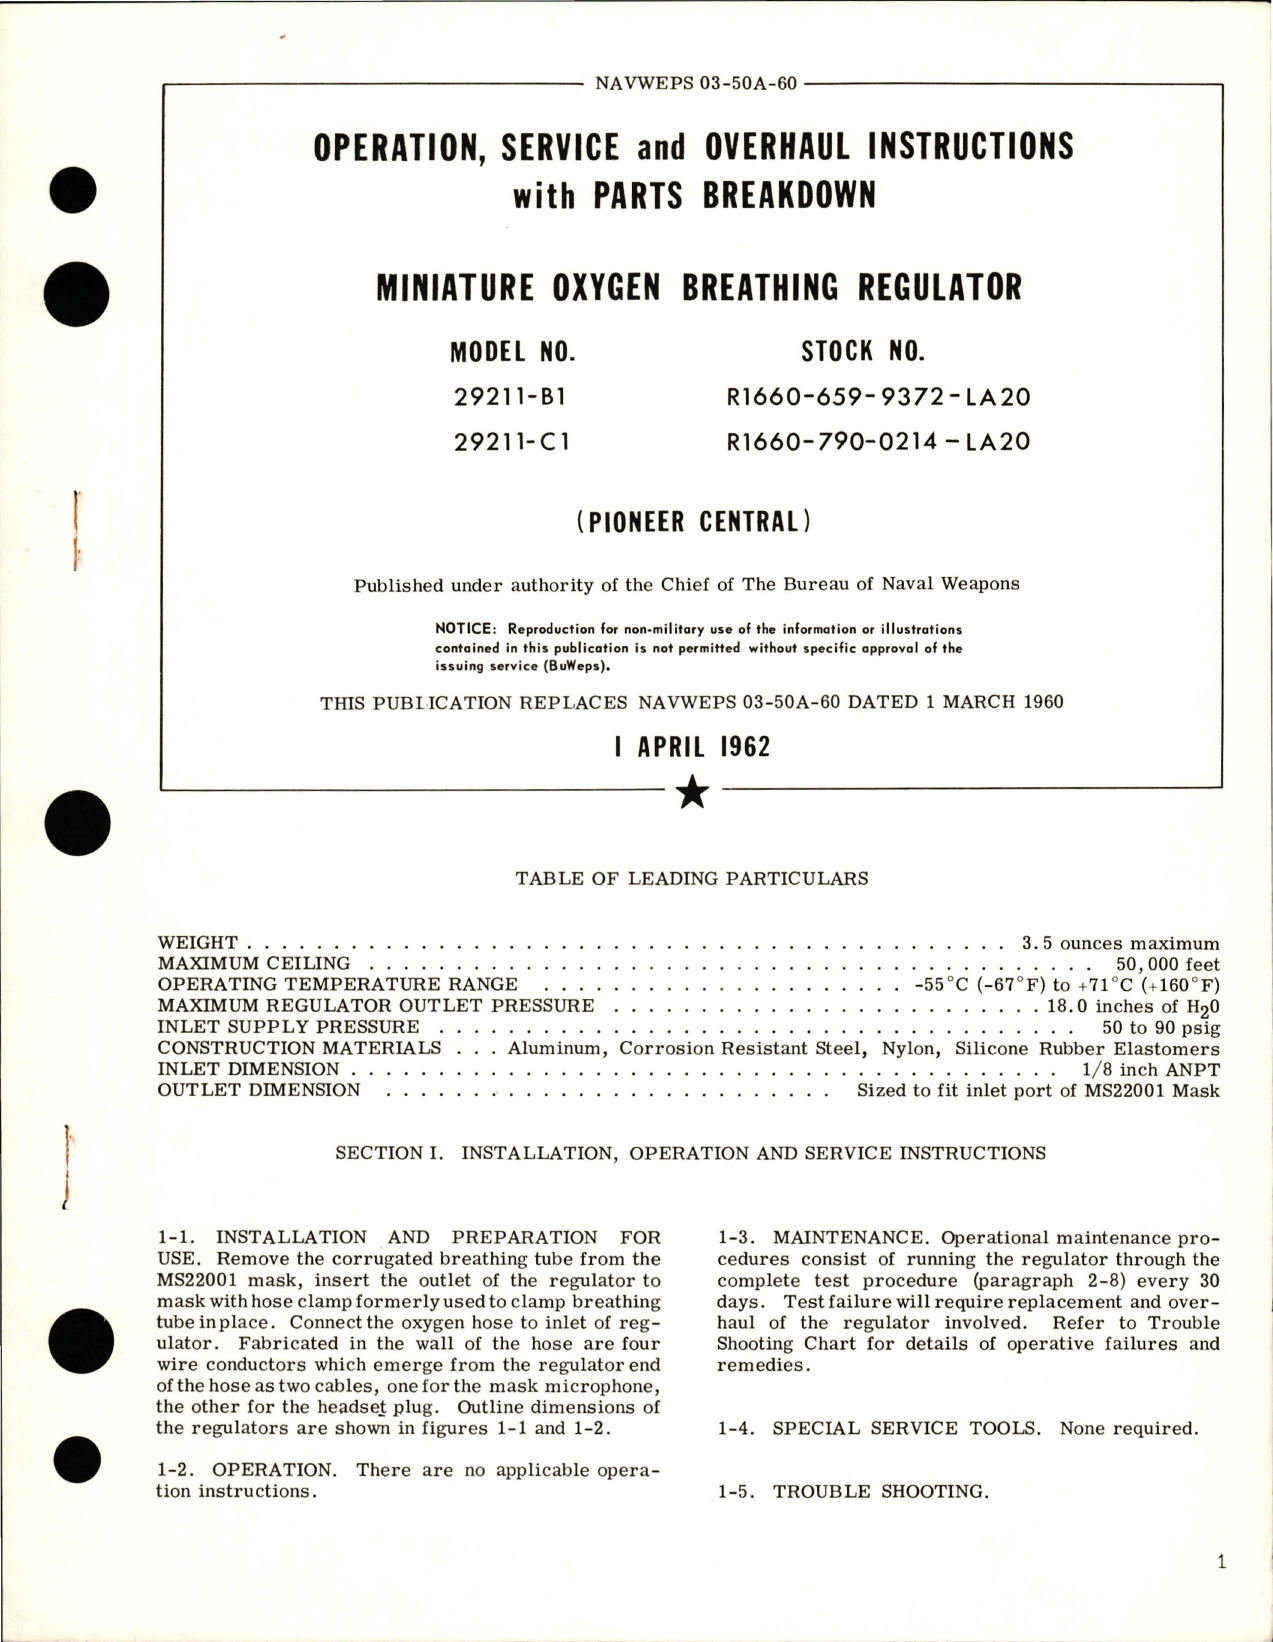 Sample page 1 from AirCorps Library document: Operation, Service, Overhaul Instructions, and Parts Breakdown for Miniature Oxygen Breathing Regulator - Models 29211-B1 and 29211-C1